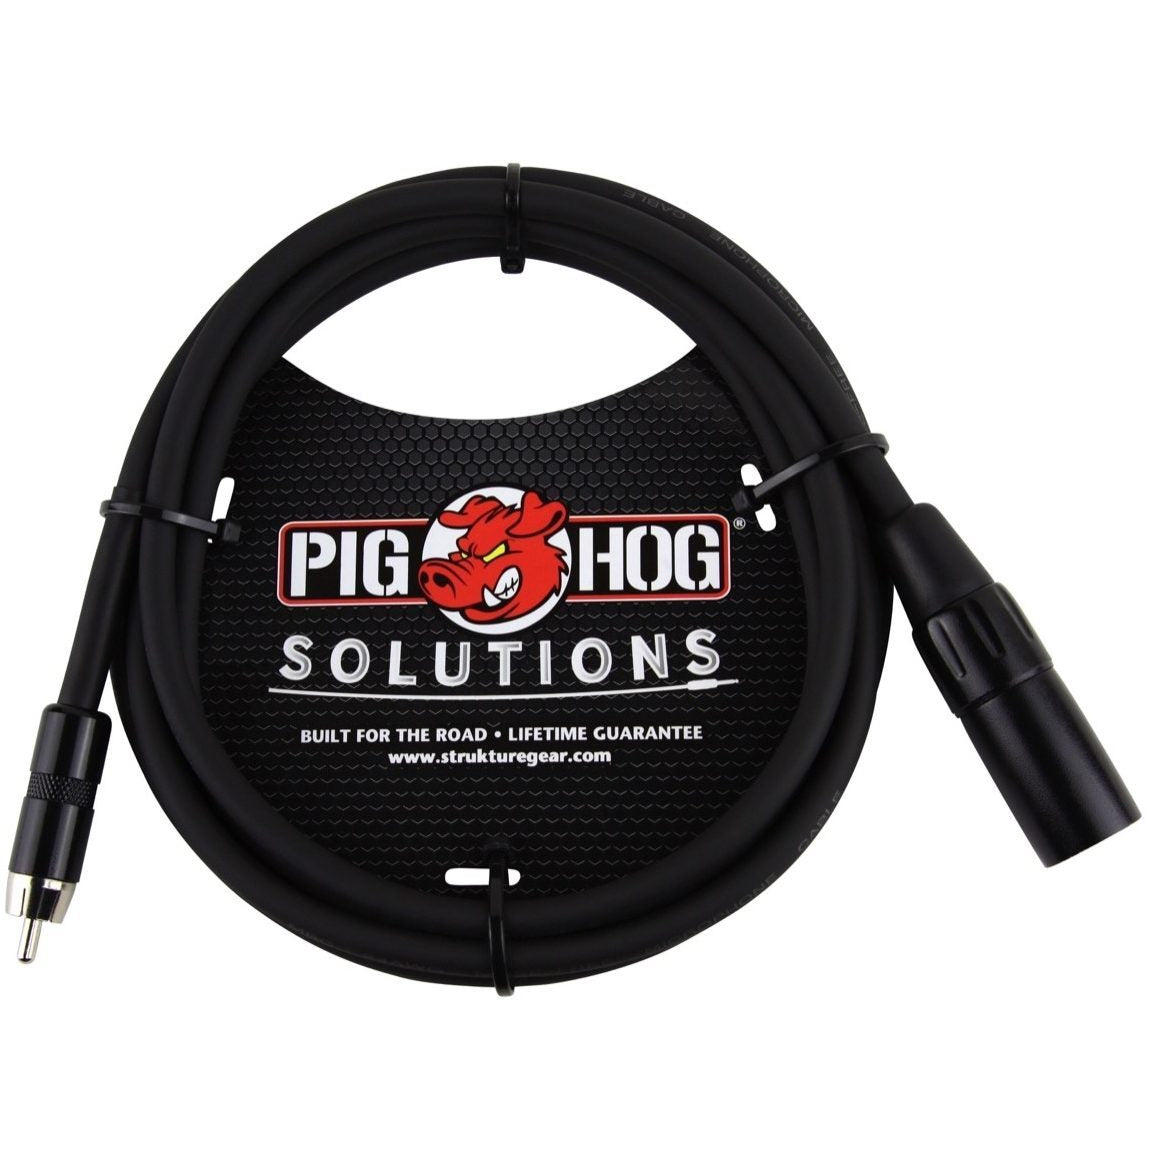 Pig Hog XLR (Male) to RCA Cable, 6 Foot